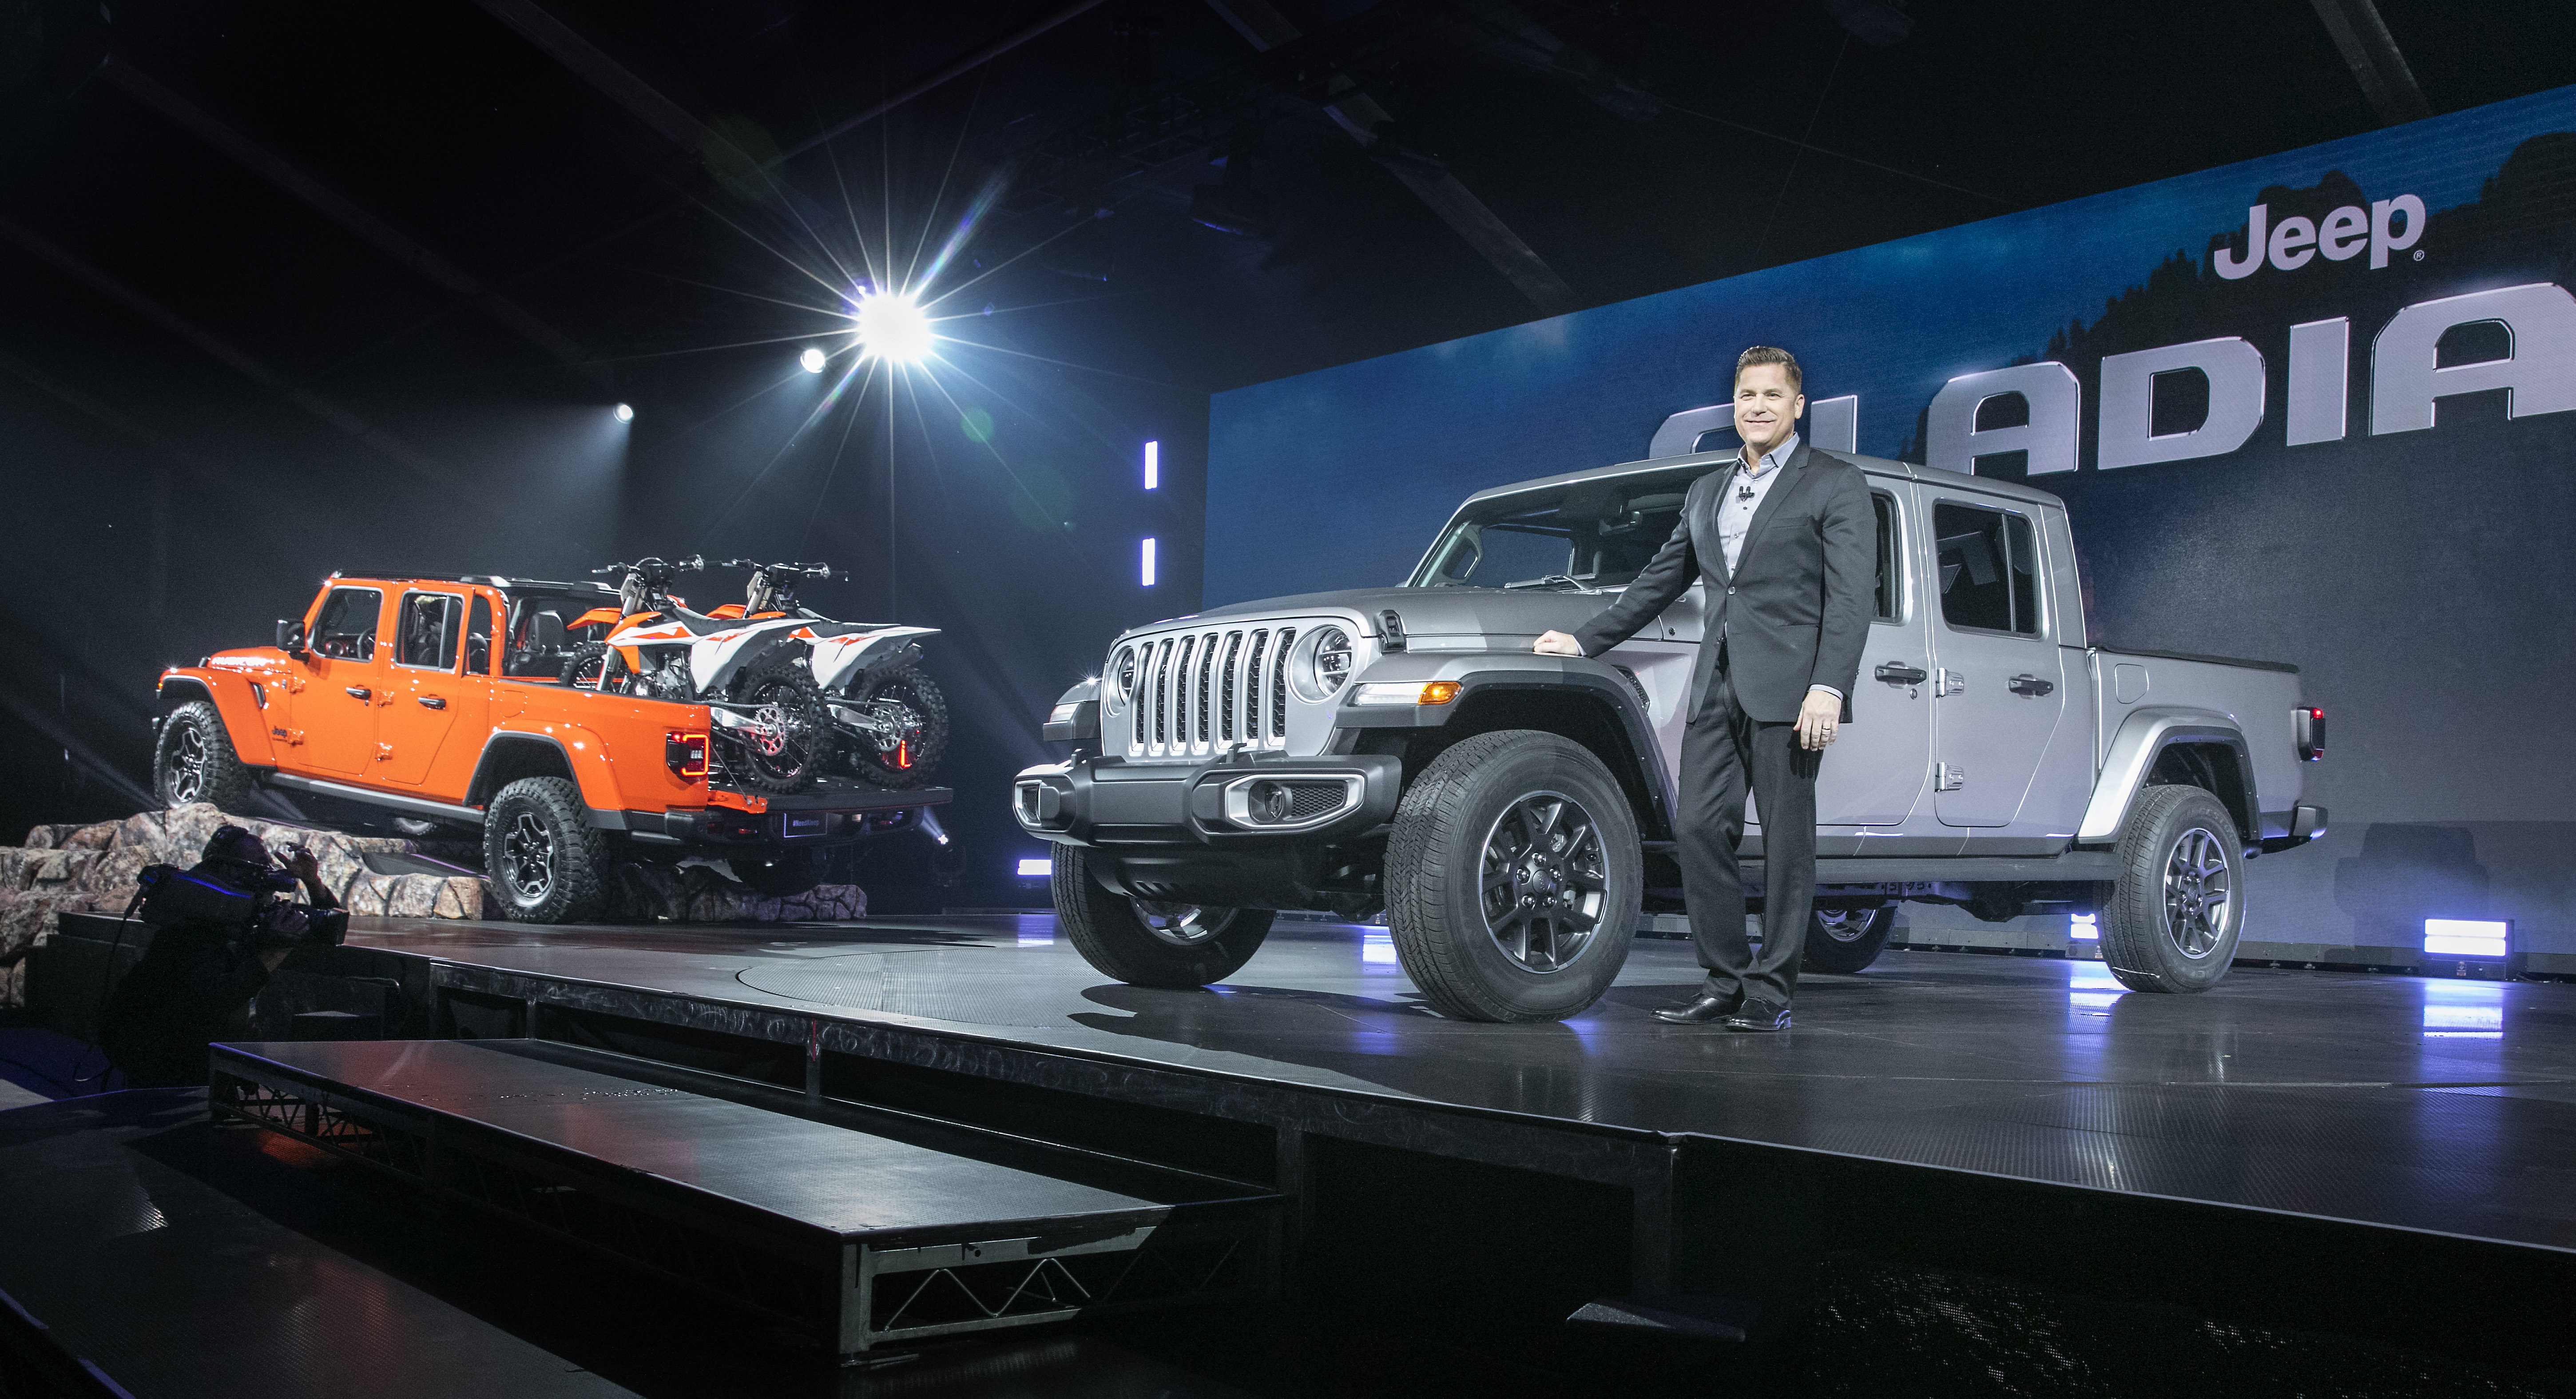 Tim Kuniskis, Head of Jeep® Brand North America, introduces the 2020 Jeep Gladiator at the Los Angeles Auto Show. The all-new 2020 Gladiator builds on a rich heritage of tough, dependable Jeep trucks with an unmatched combination of rugged utility, authentic Jeep design, open-air freedom, clever functionality and versatility, best-in-class towing and 4x4 payload, advanced fuel-efficient powertrains, superior on- and off-road dynamics and a host of innovative safety and advanced technology features. The all-new 2020 Gladiator is available in a crew cab model in multiple trim configurations.